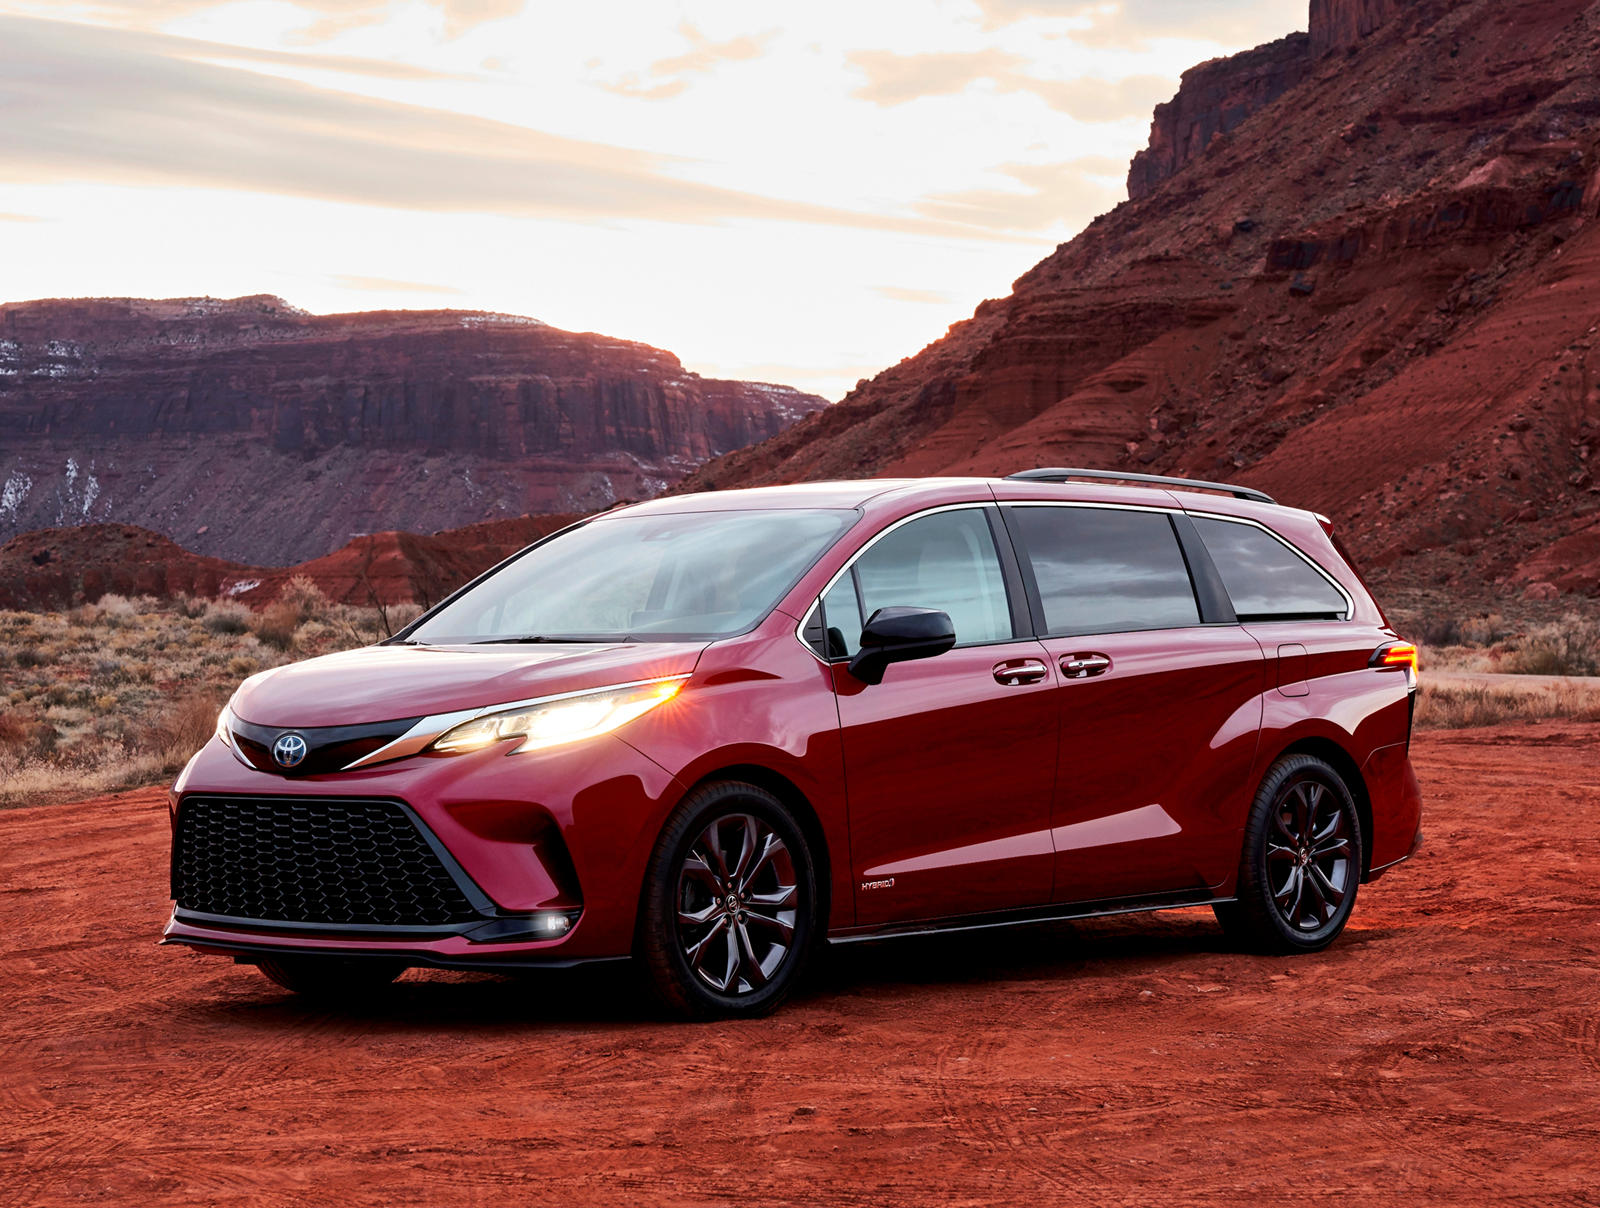 2021 Toyota Sienna First Look Review: Electrified Swagger Wagon | CarBuzz